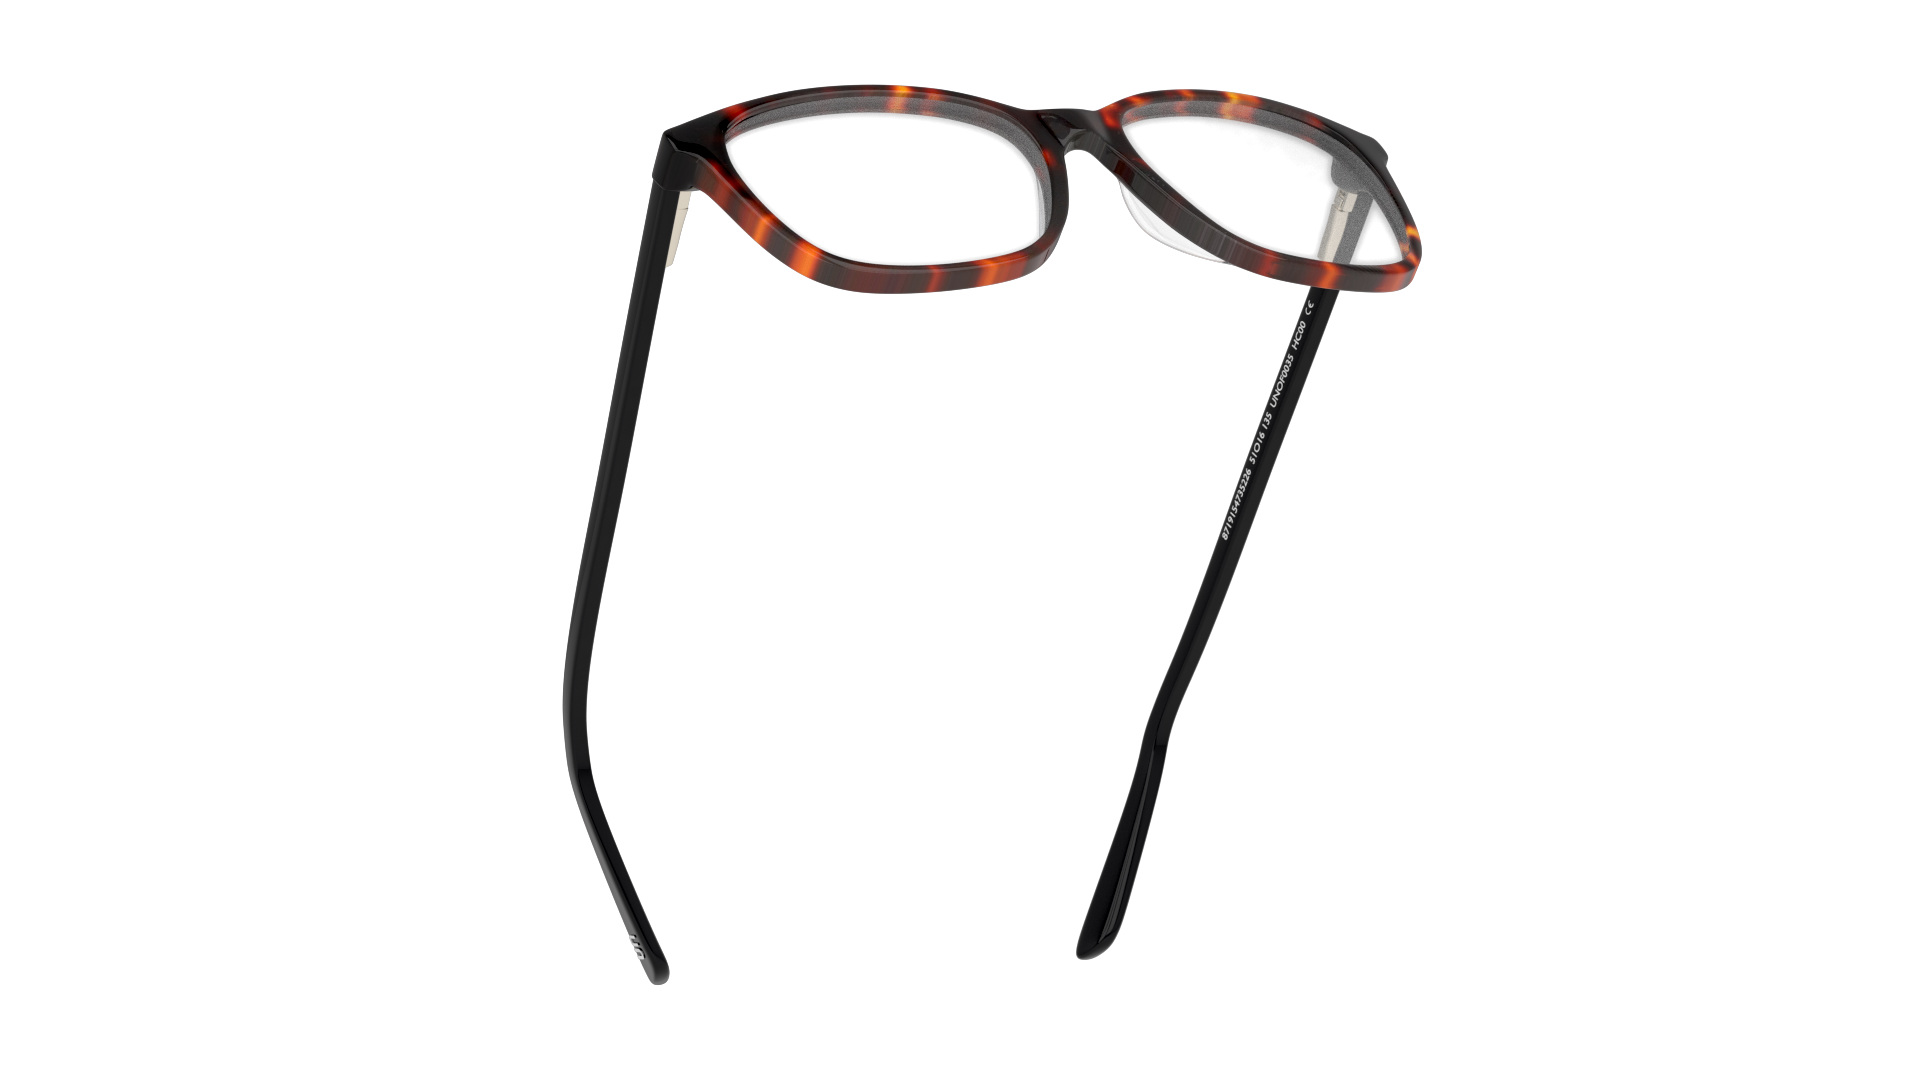 Bottom_Up Unofficial UNOF0035 (HB00) Glasses Transparent / Tortoise Shell